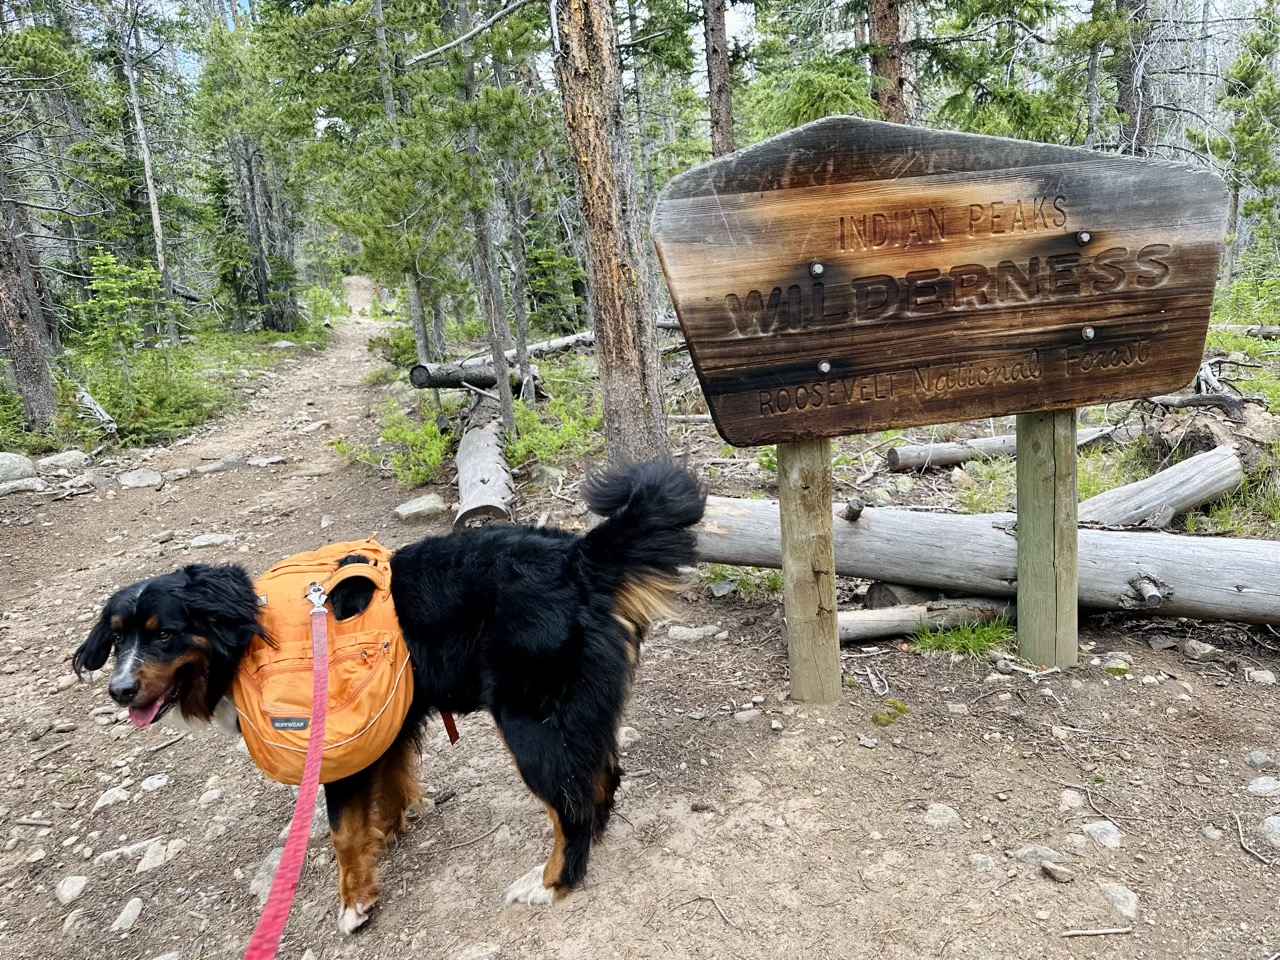 Lyra in front of the Indian Peaks Wilderness sign